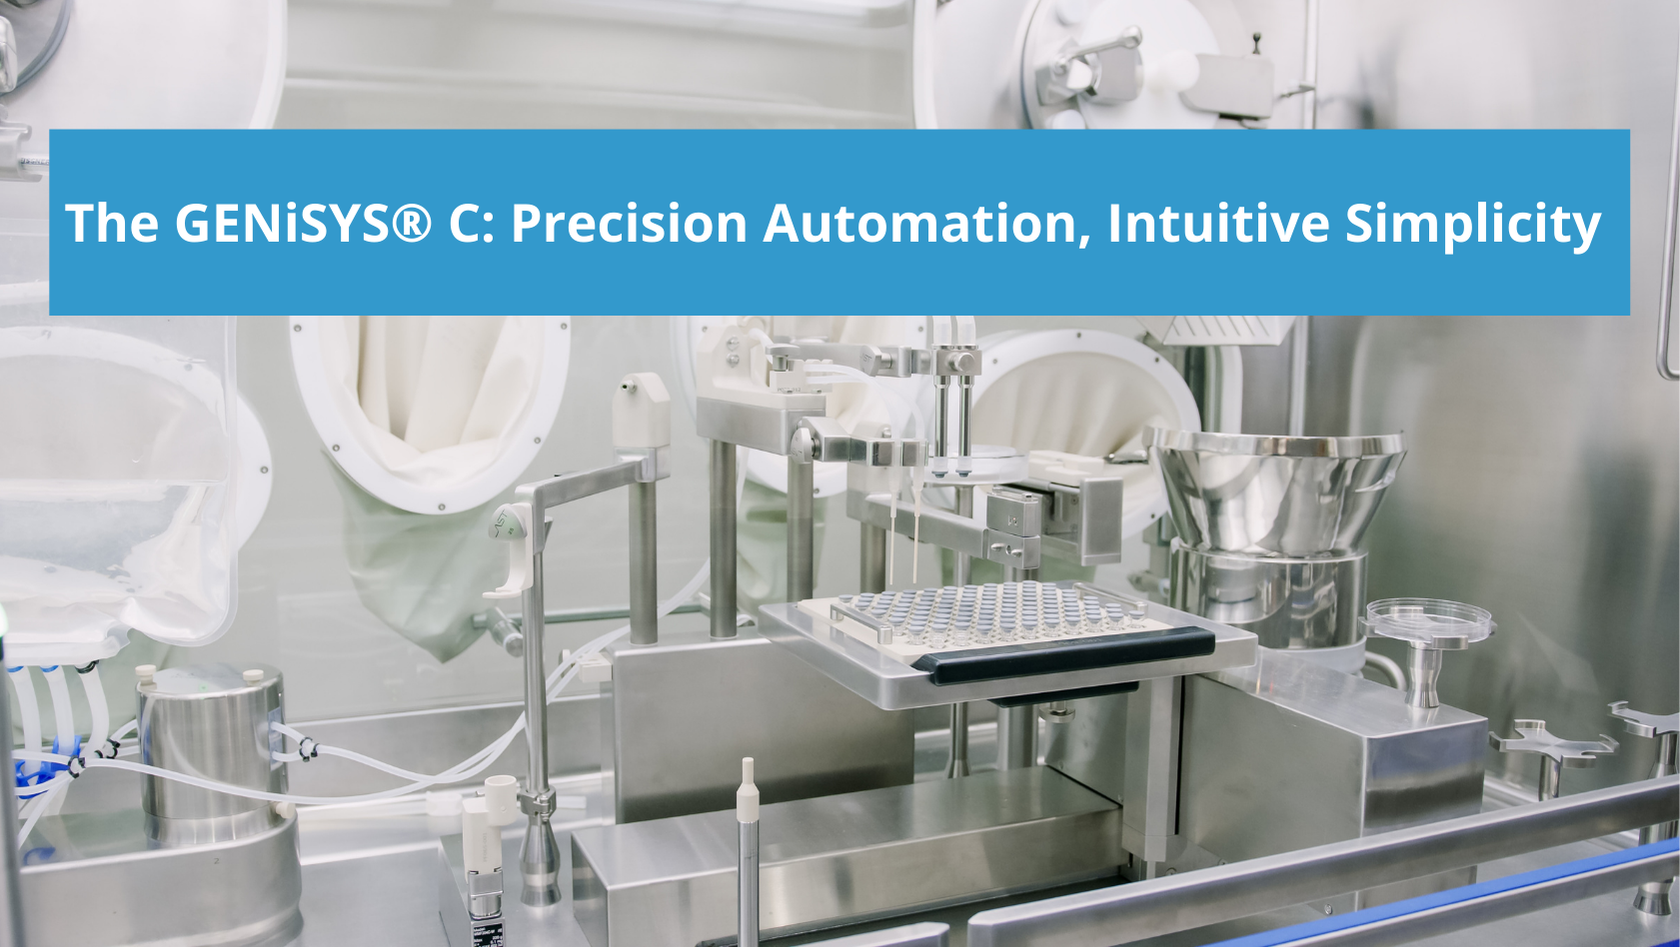 The GENiSYS® C: Precision Automation, Intuitive Simplicity